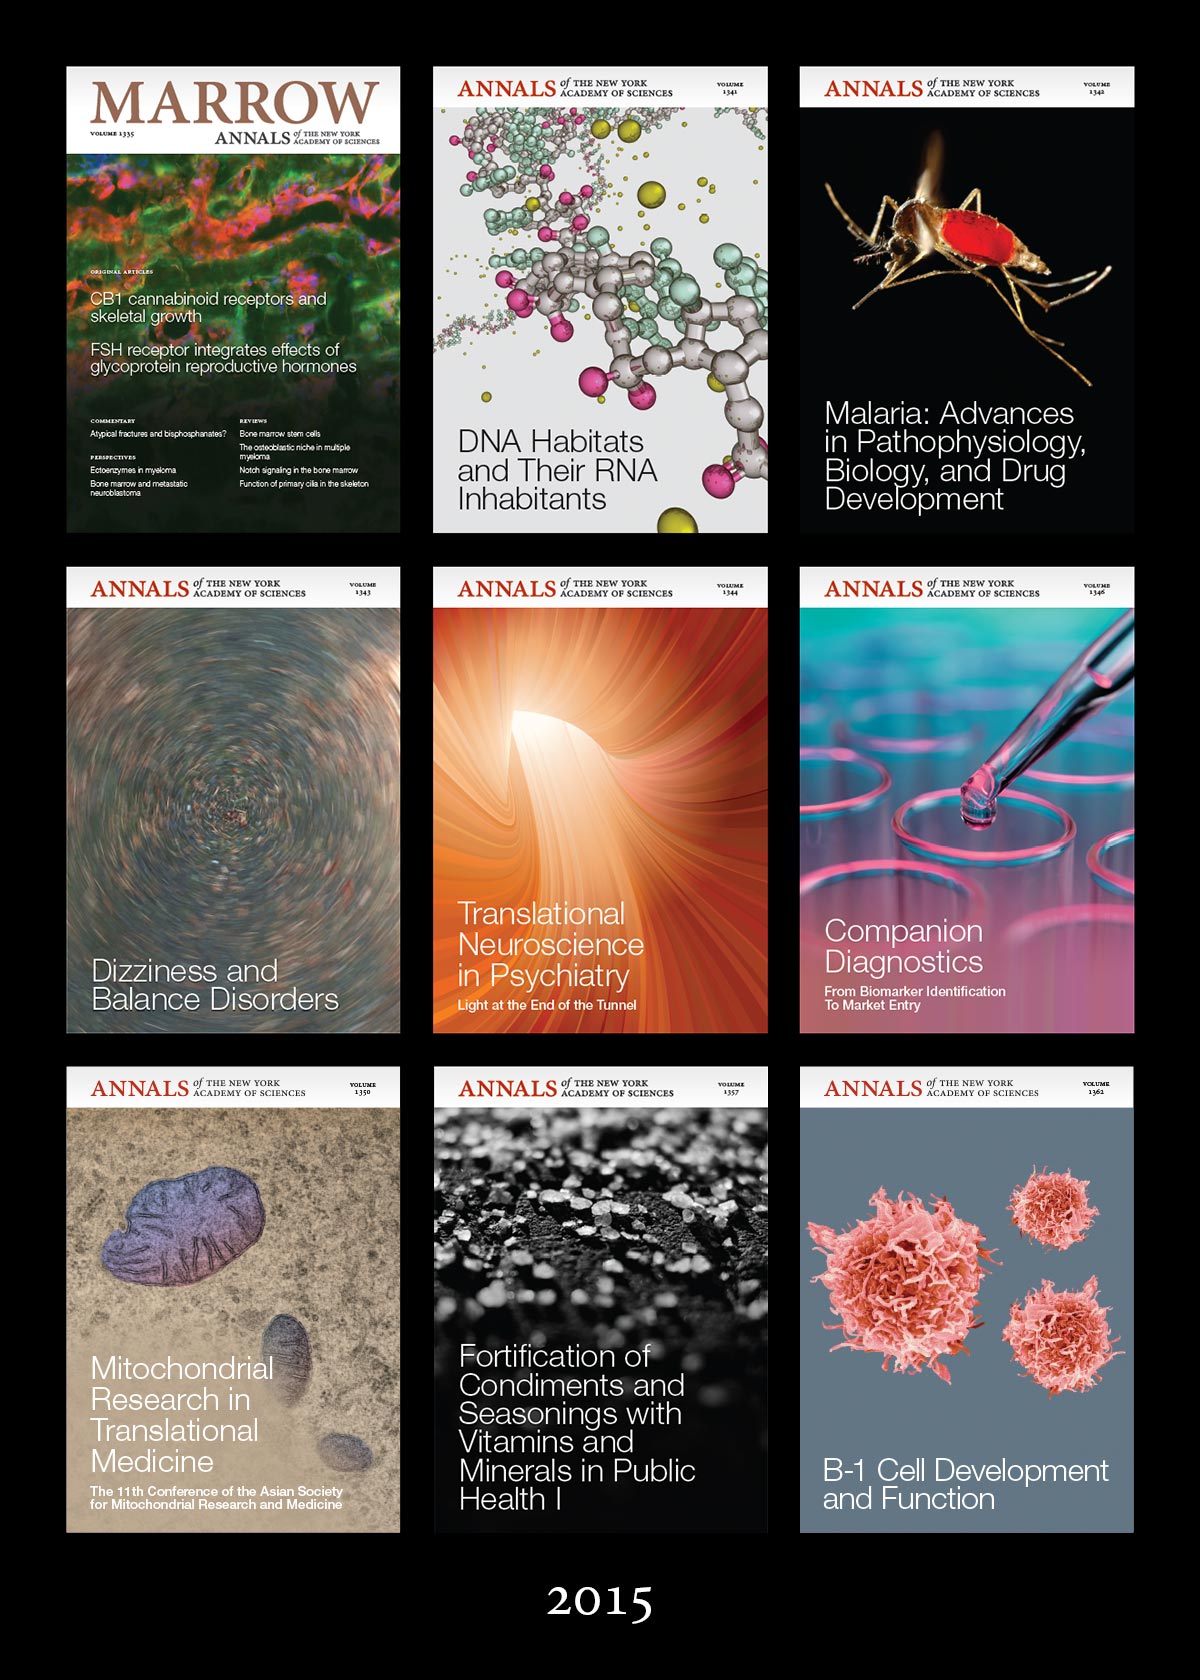 2015 covers